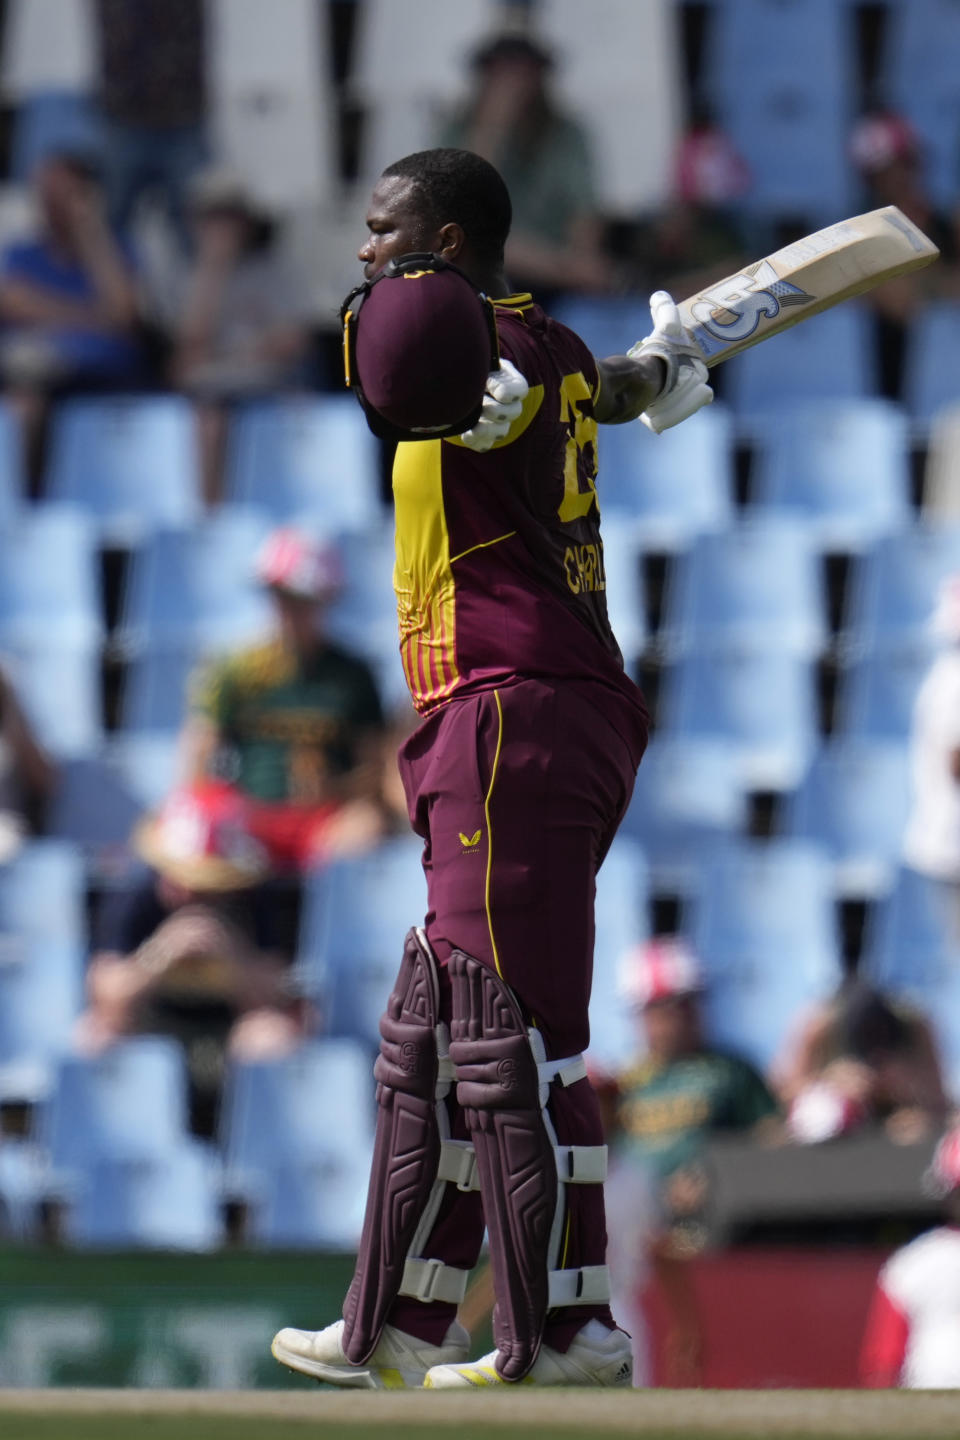 West Indies's batsman Johnson Charles celebrates his century during the second T20 cricket match between South Africa and West Indies, at Centurion Park, in Pretoria, South Africa, Sunday, March 26, 2023. (AP Photo/Themba Hadebe)